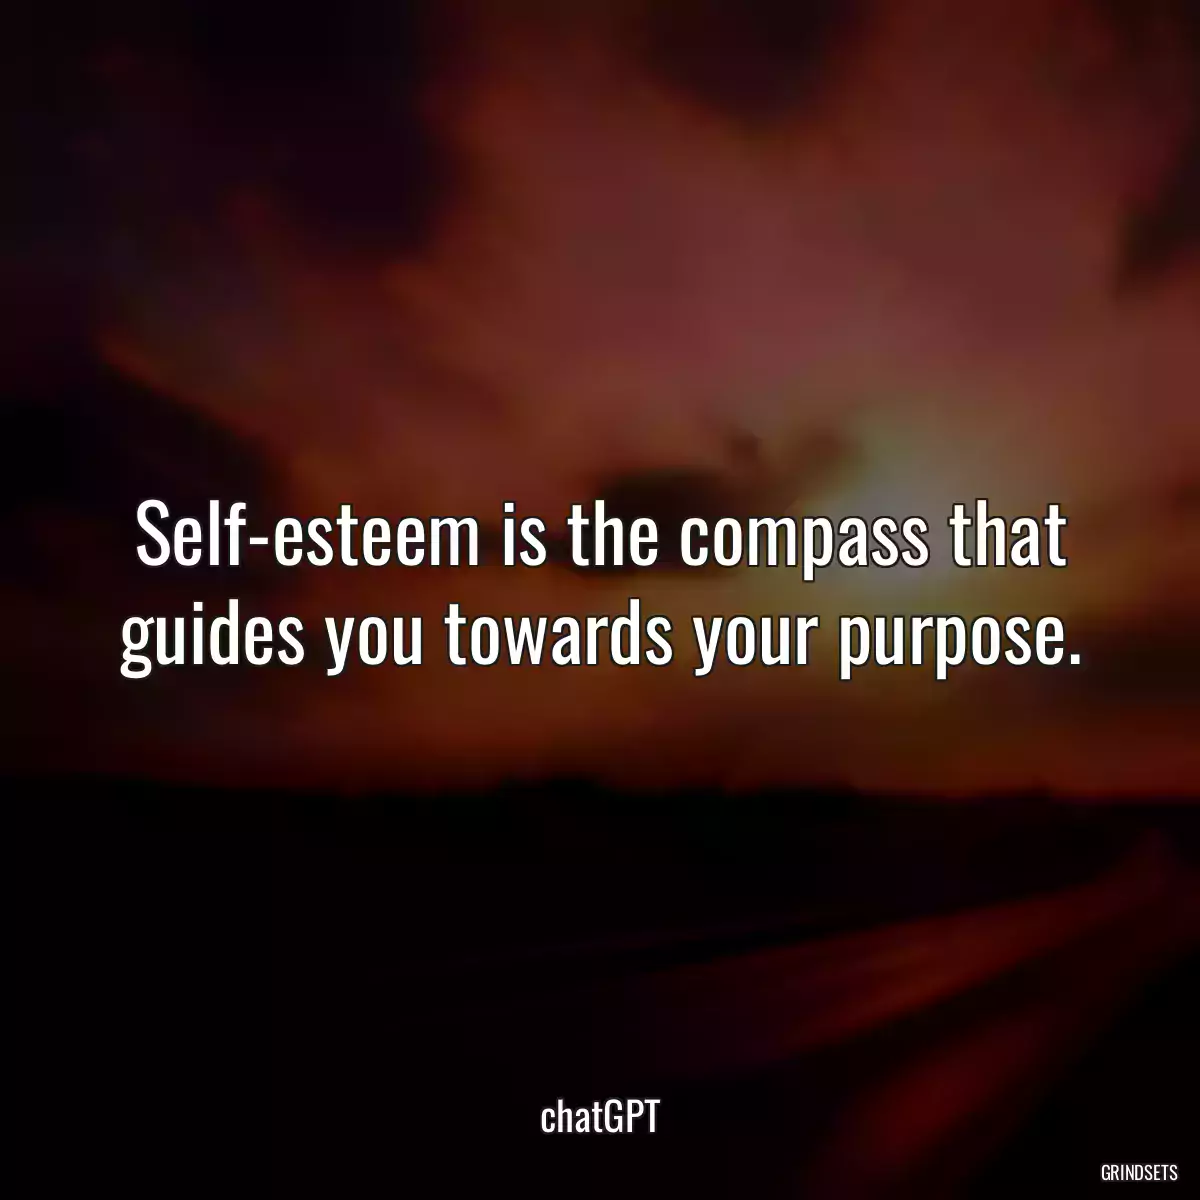 Self-esteem is the compass that guides you towards your purpose.